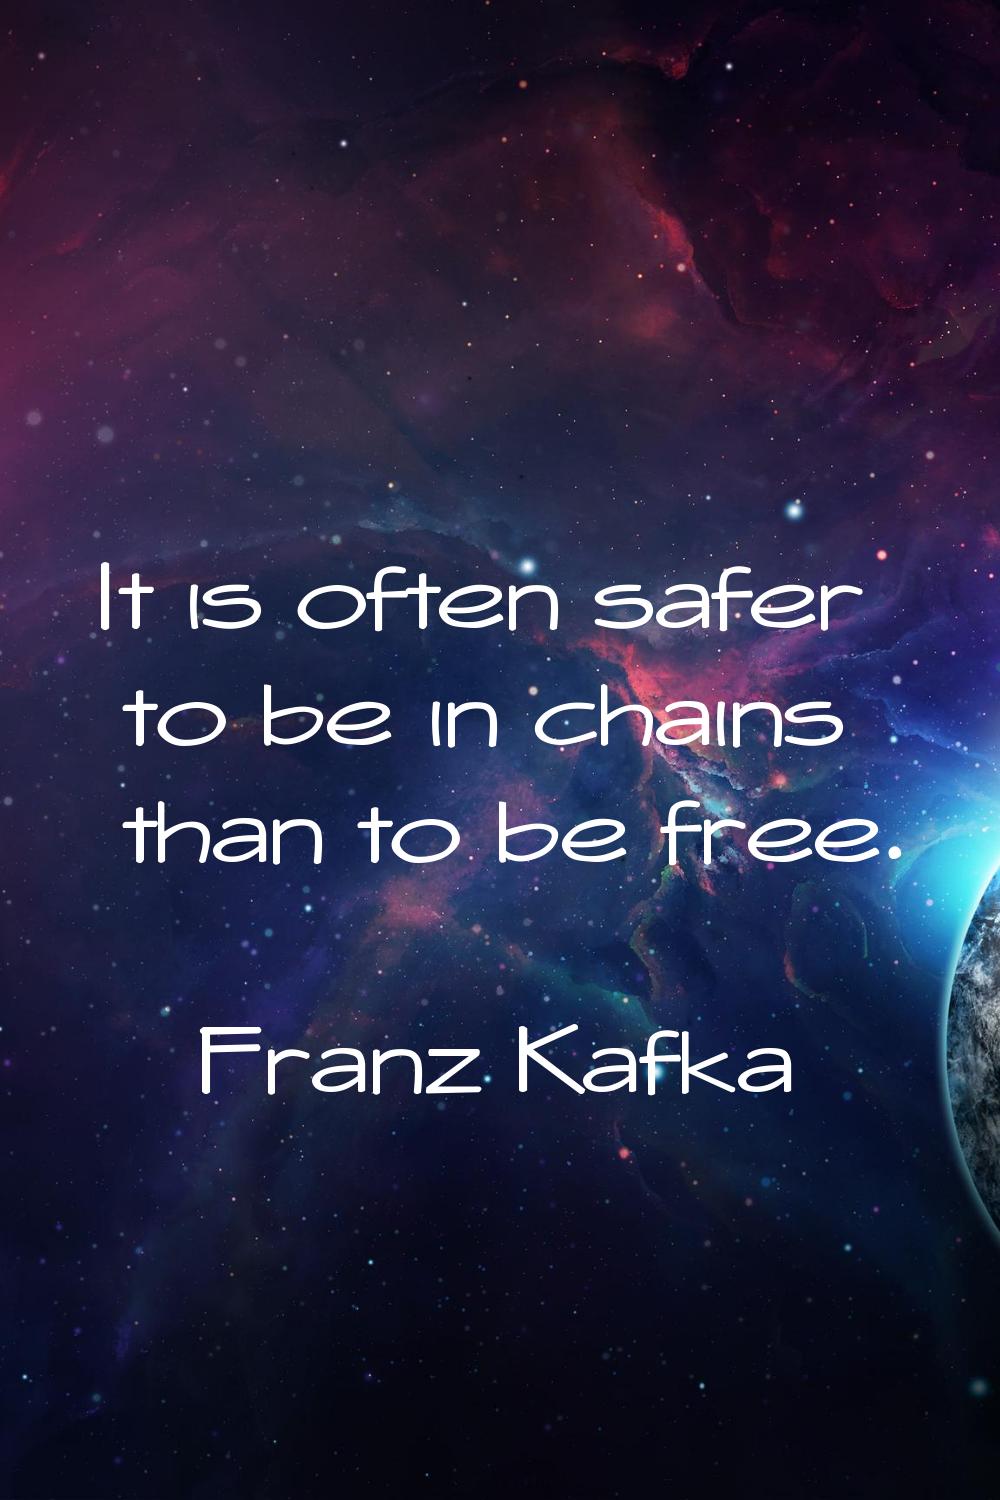 It is often safer to be in chains than to be free.